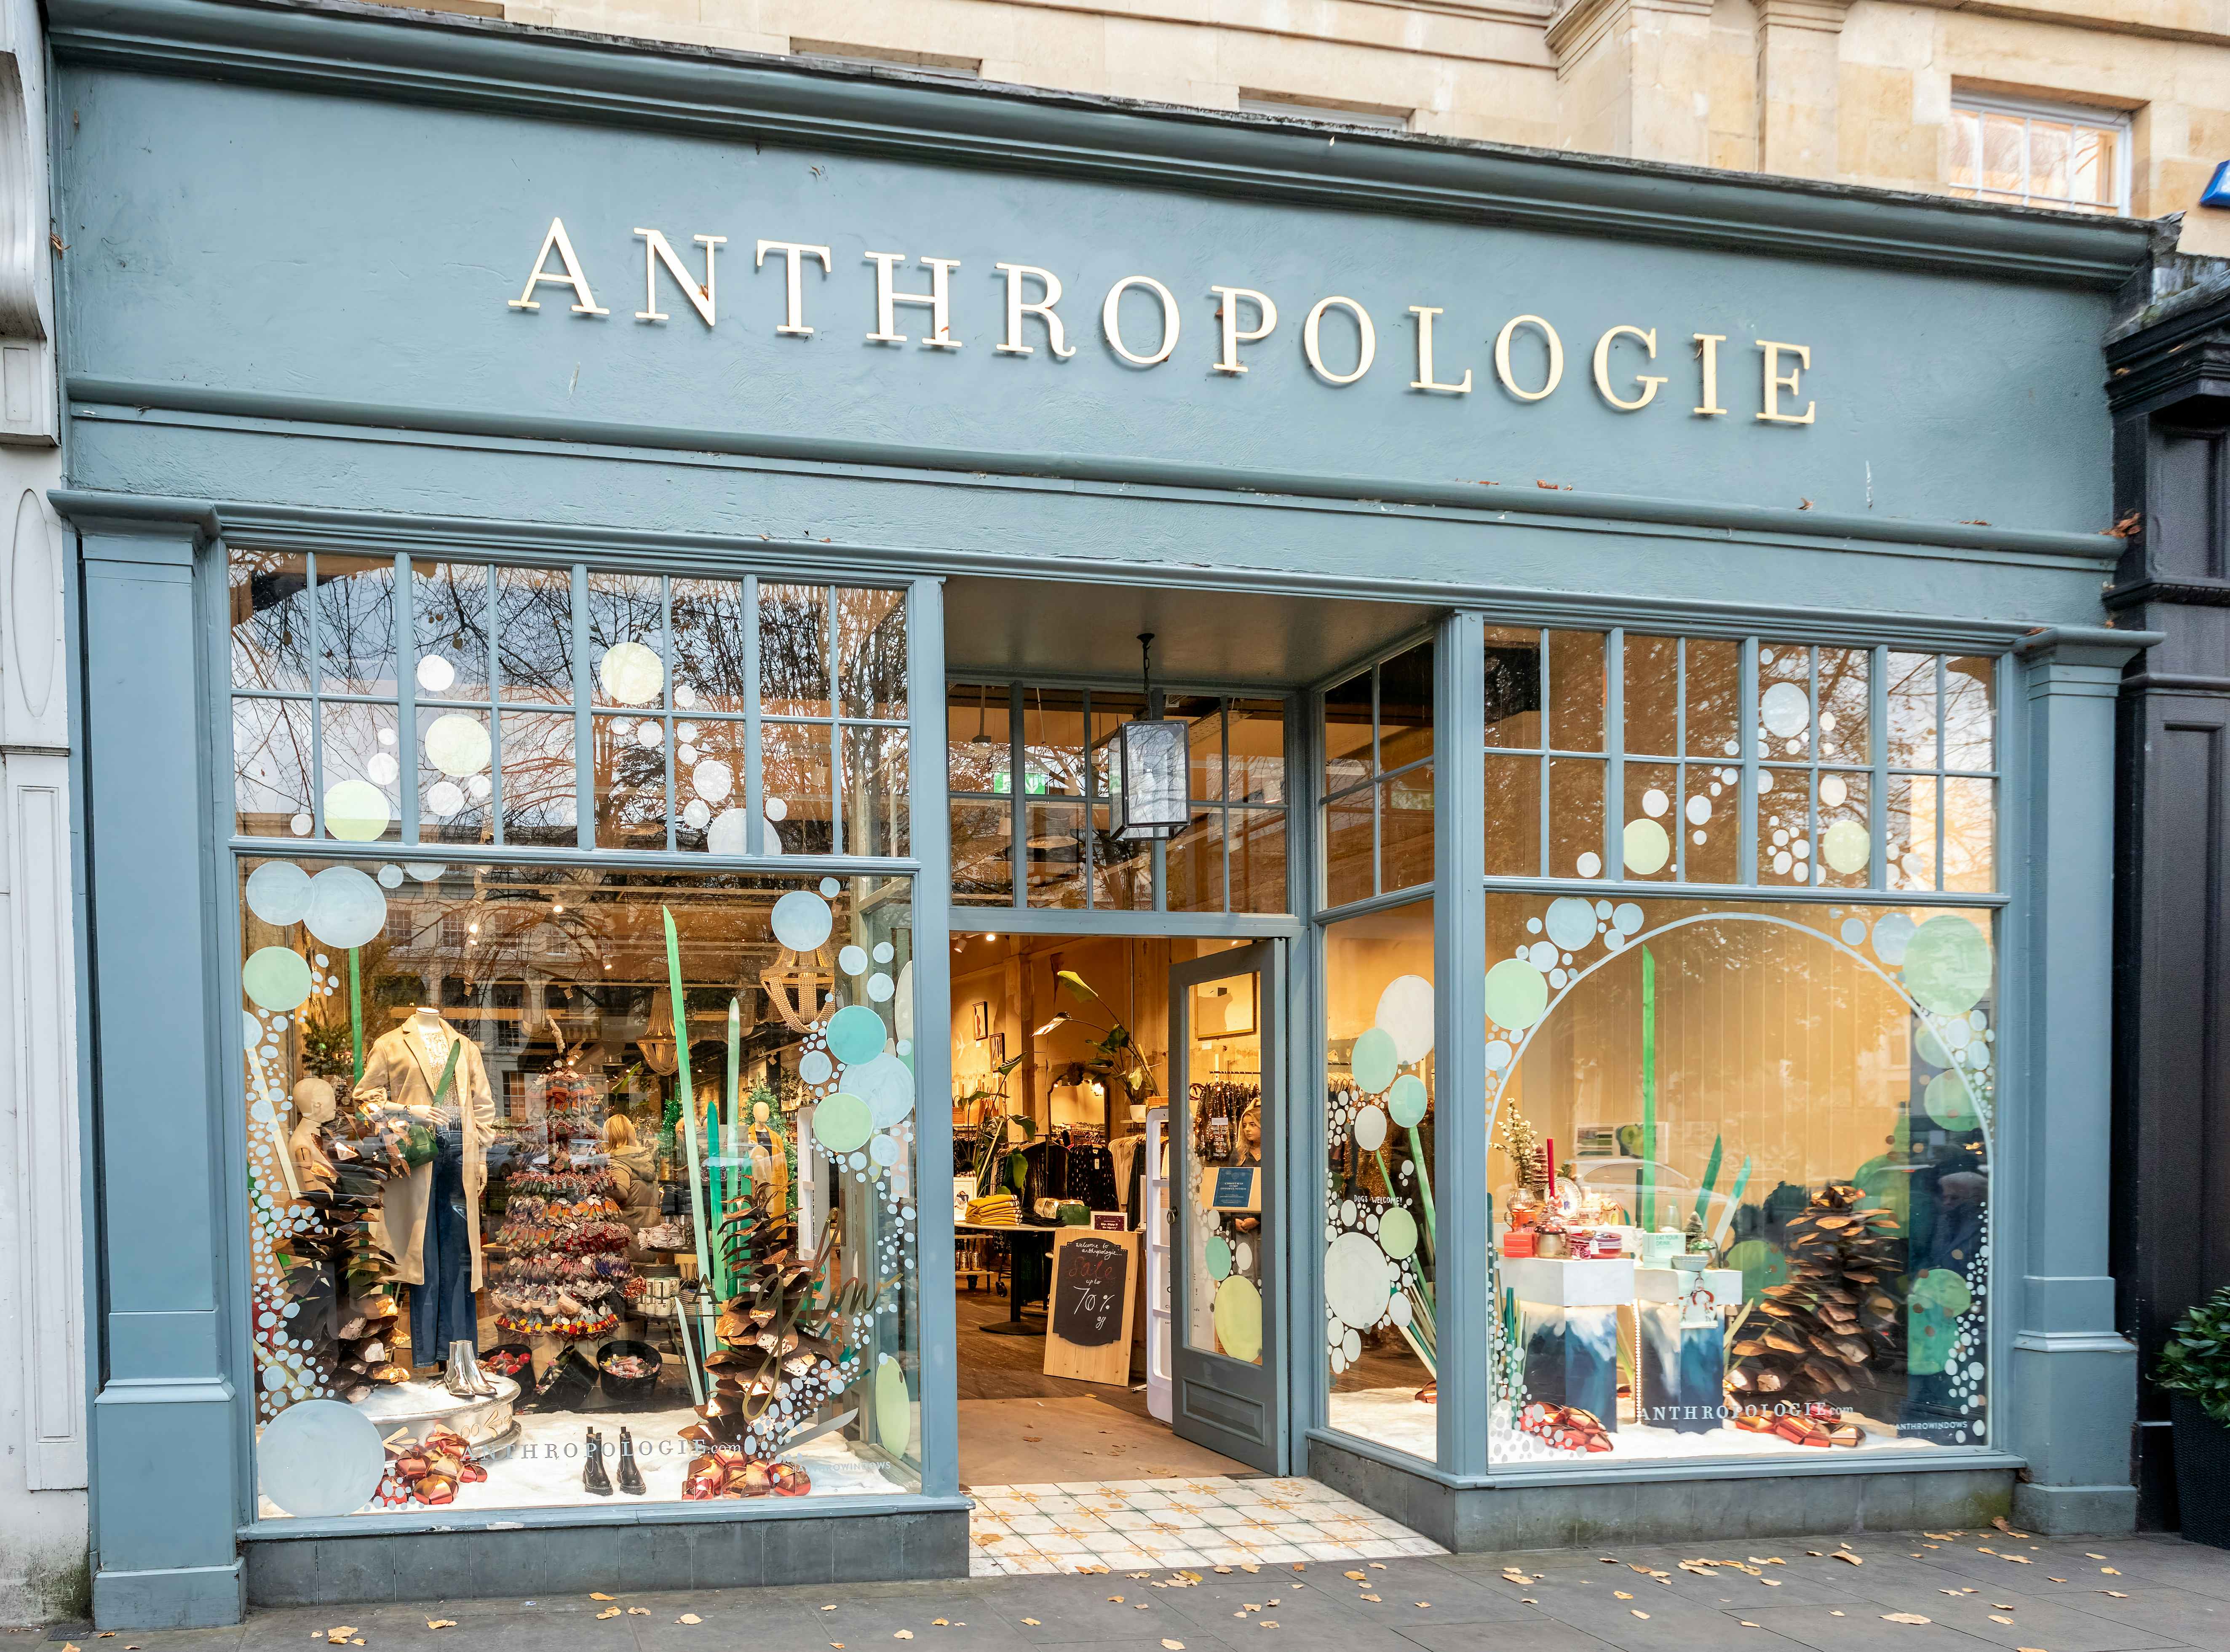 An Anthropologie store front.